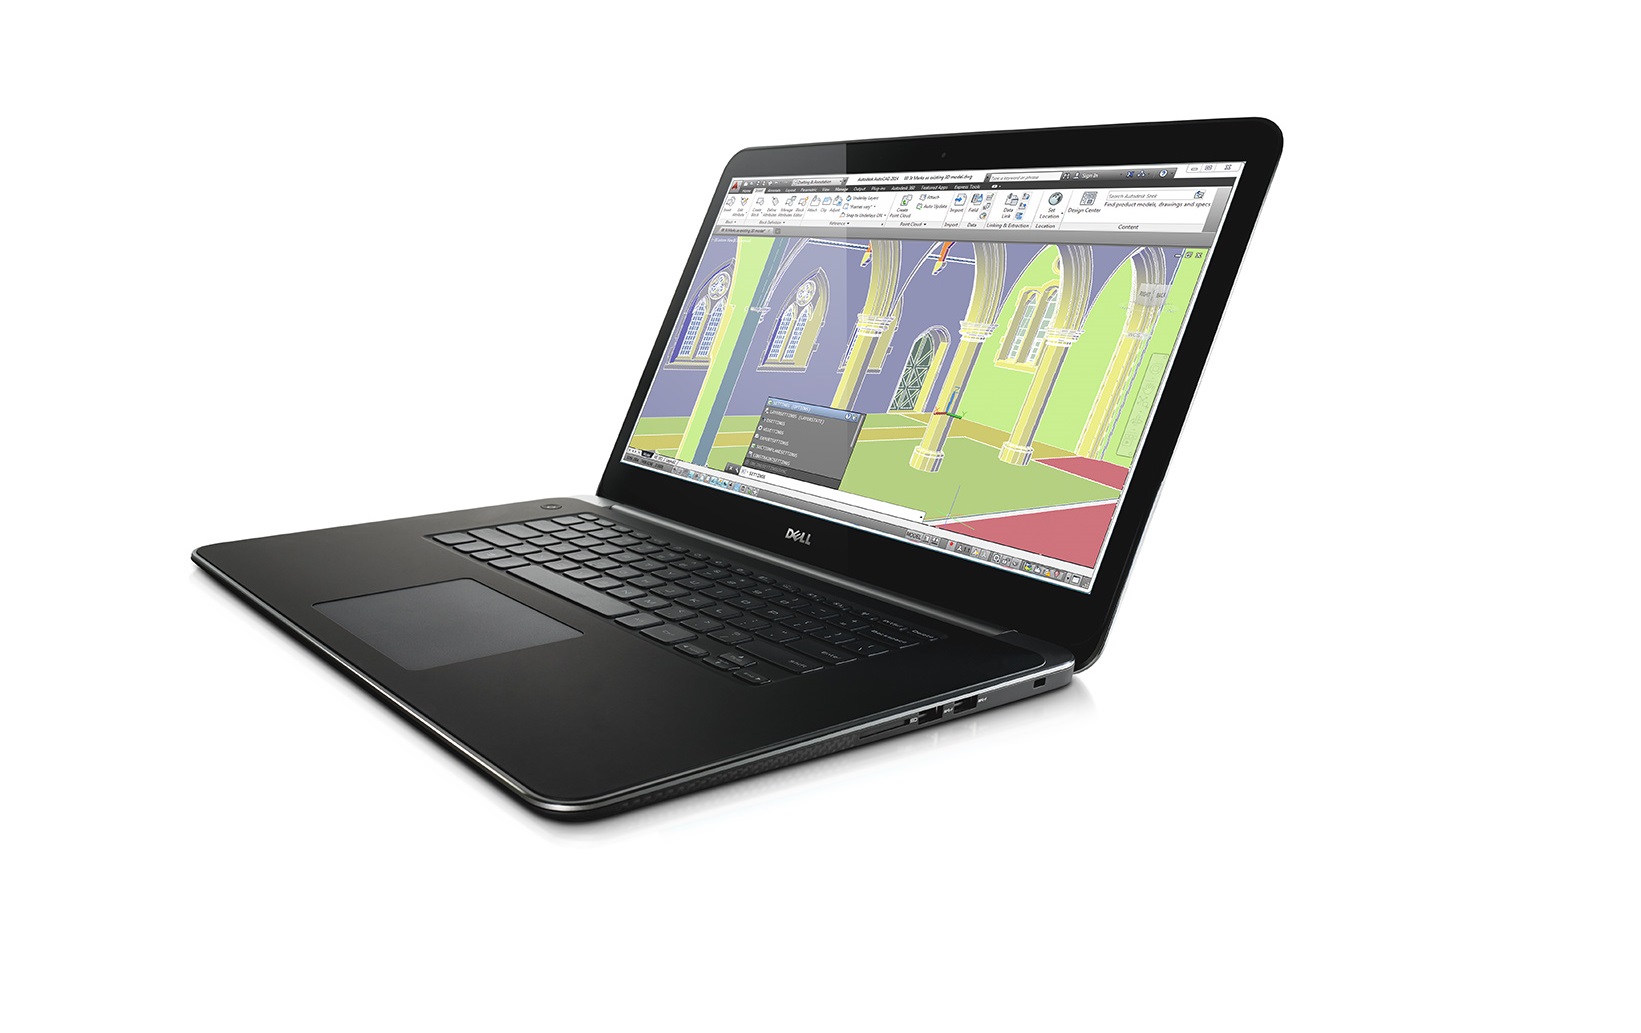 PR: Dell Officially Launches the Precision M3800 Mobile Workstation